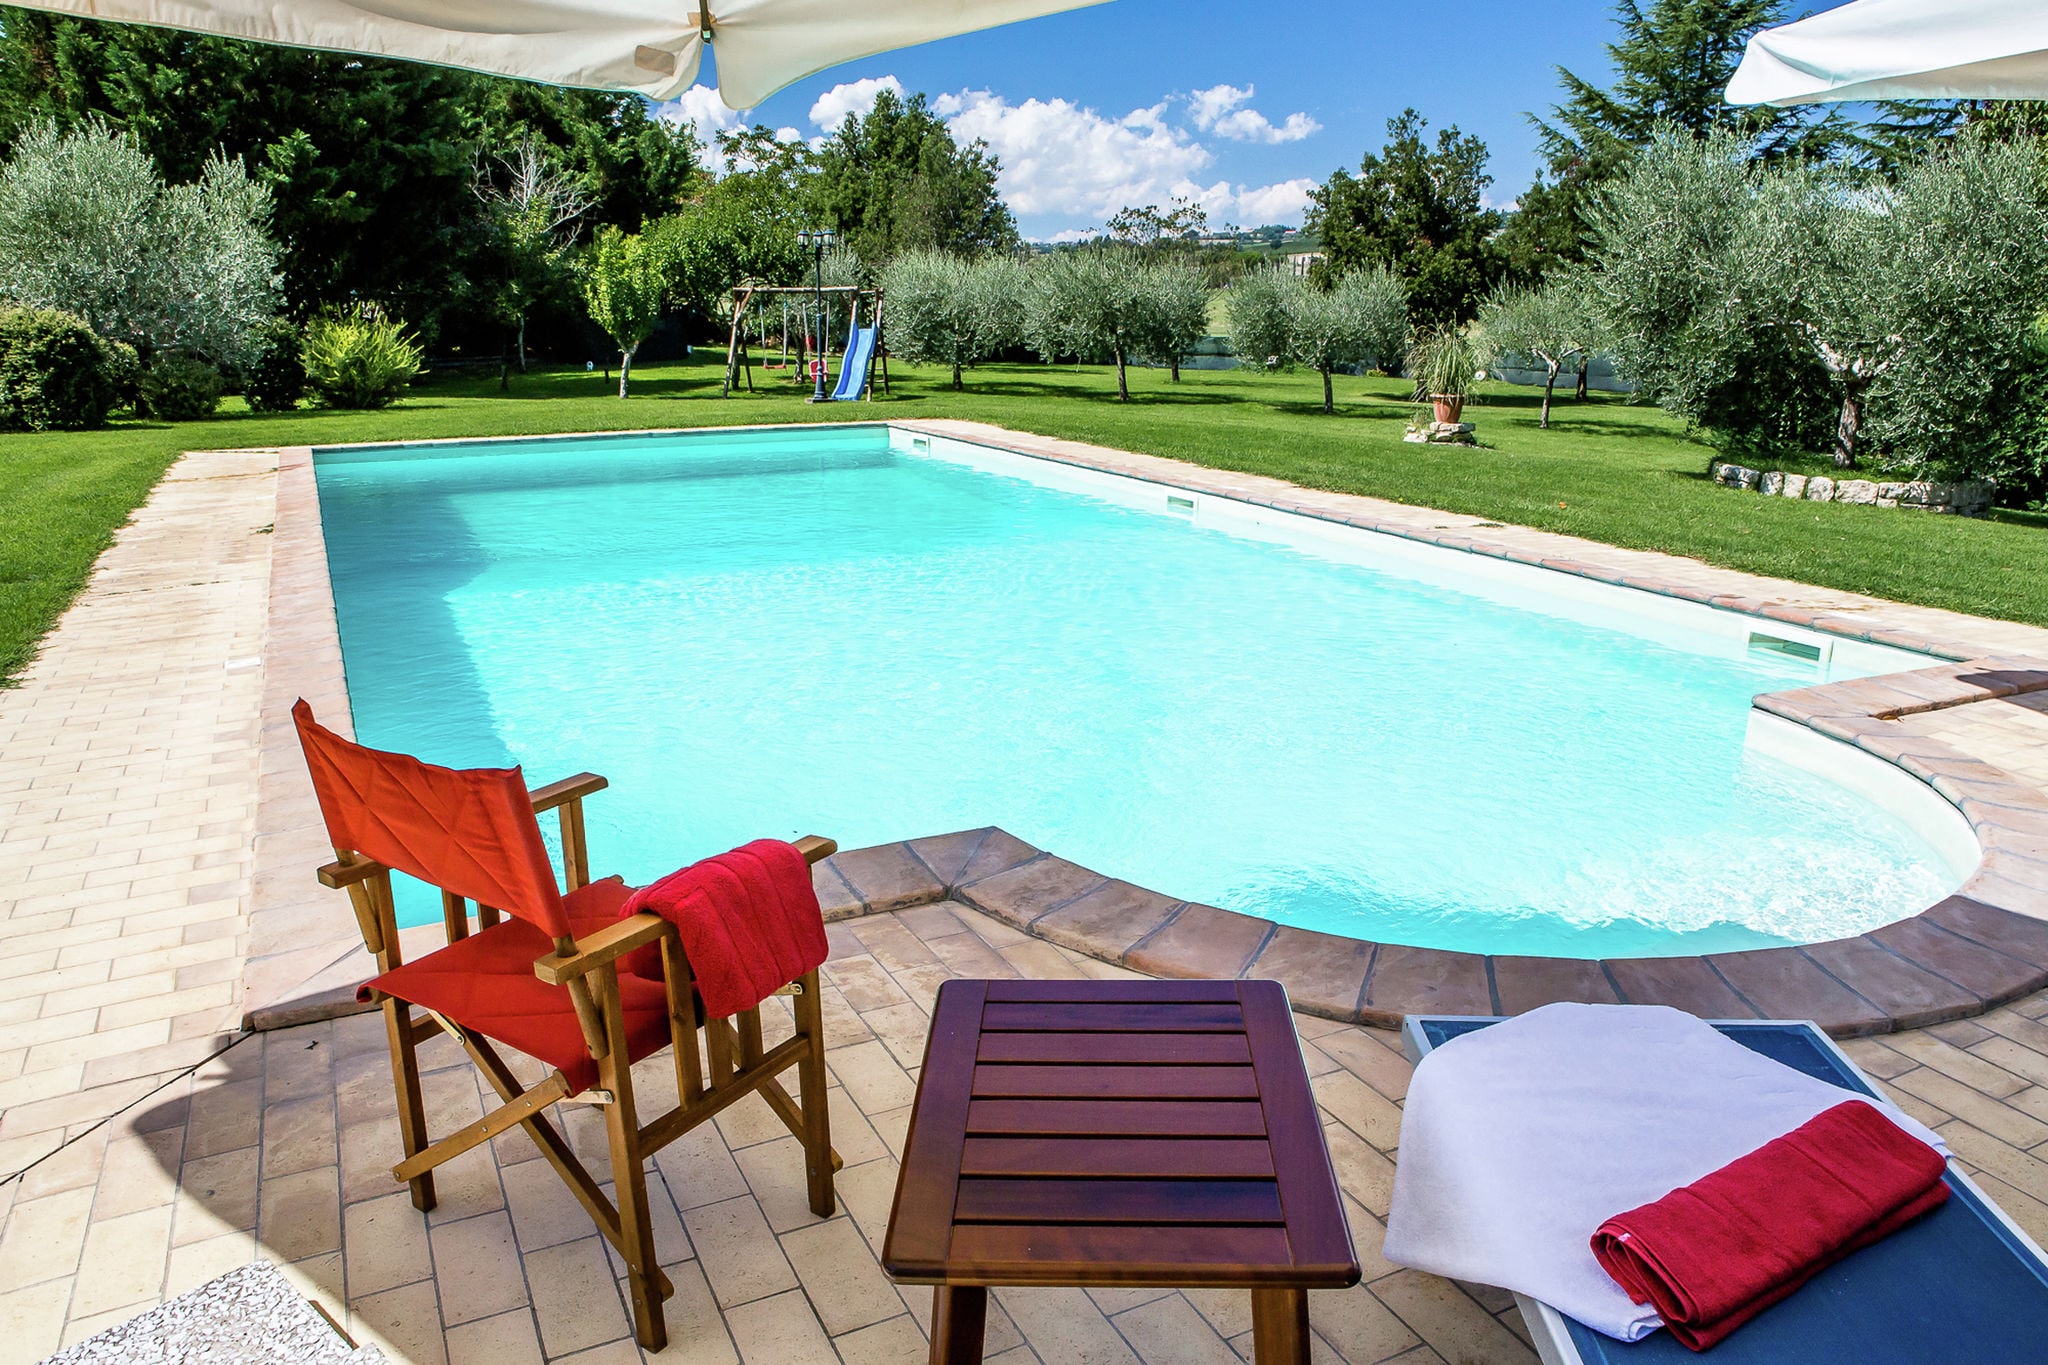 Serene cottage in Marsciano with private terrace